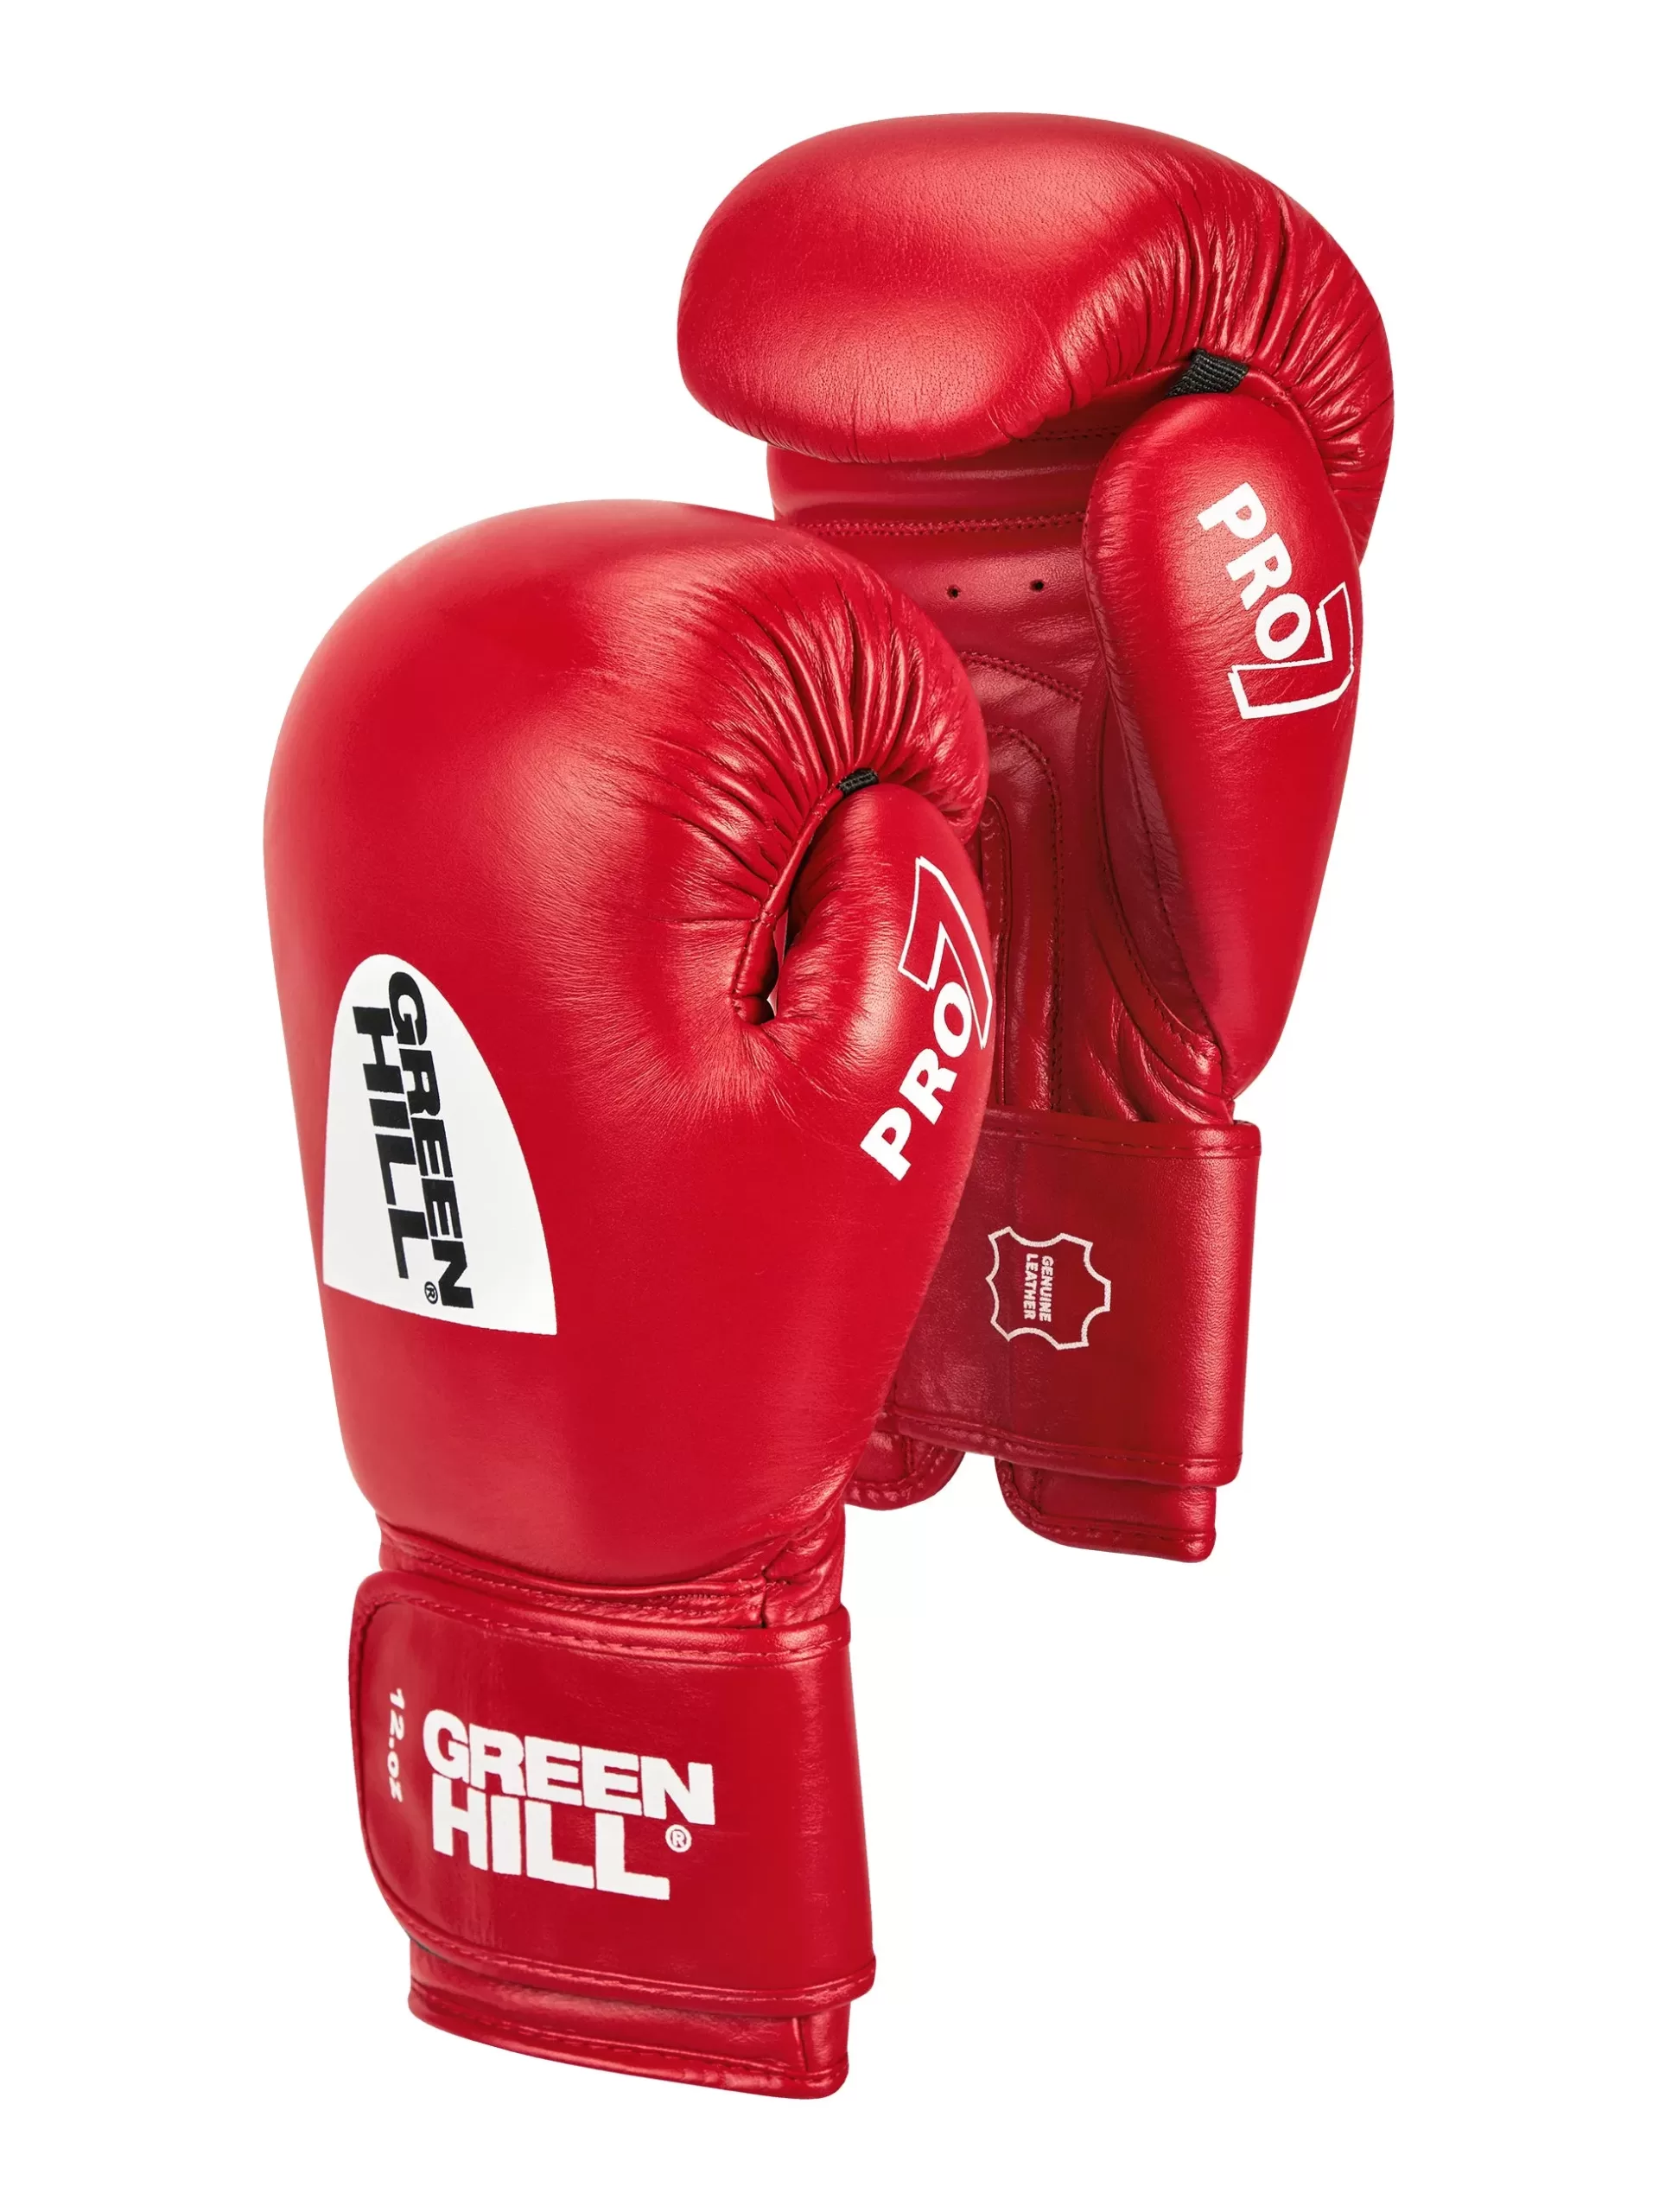 Boxing gloves Pro 7